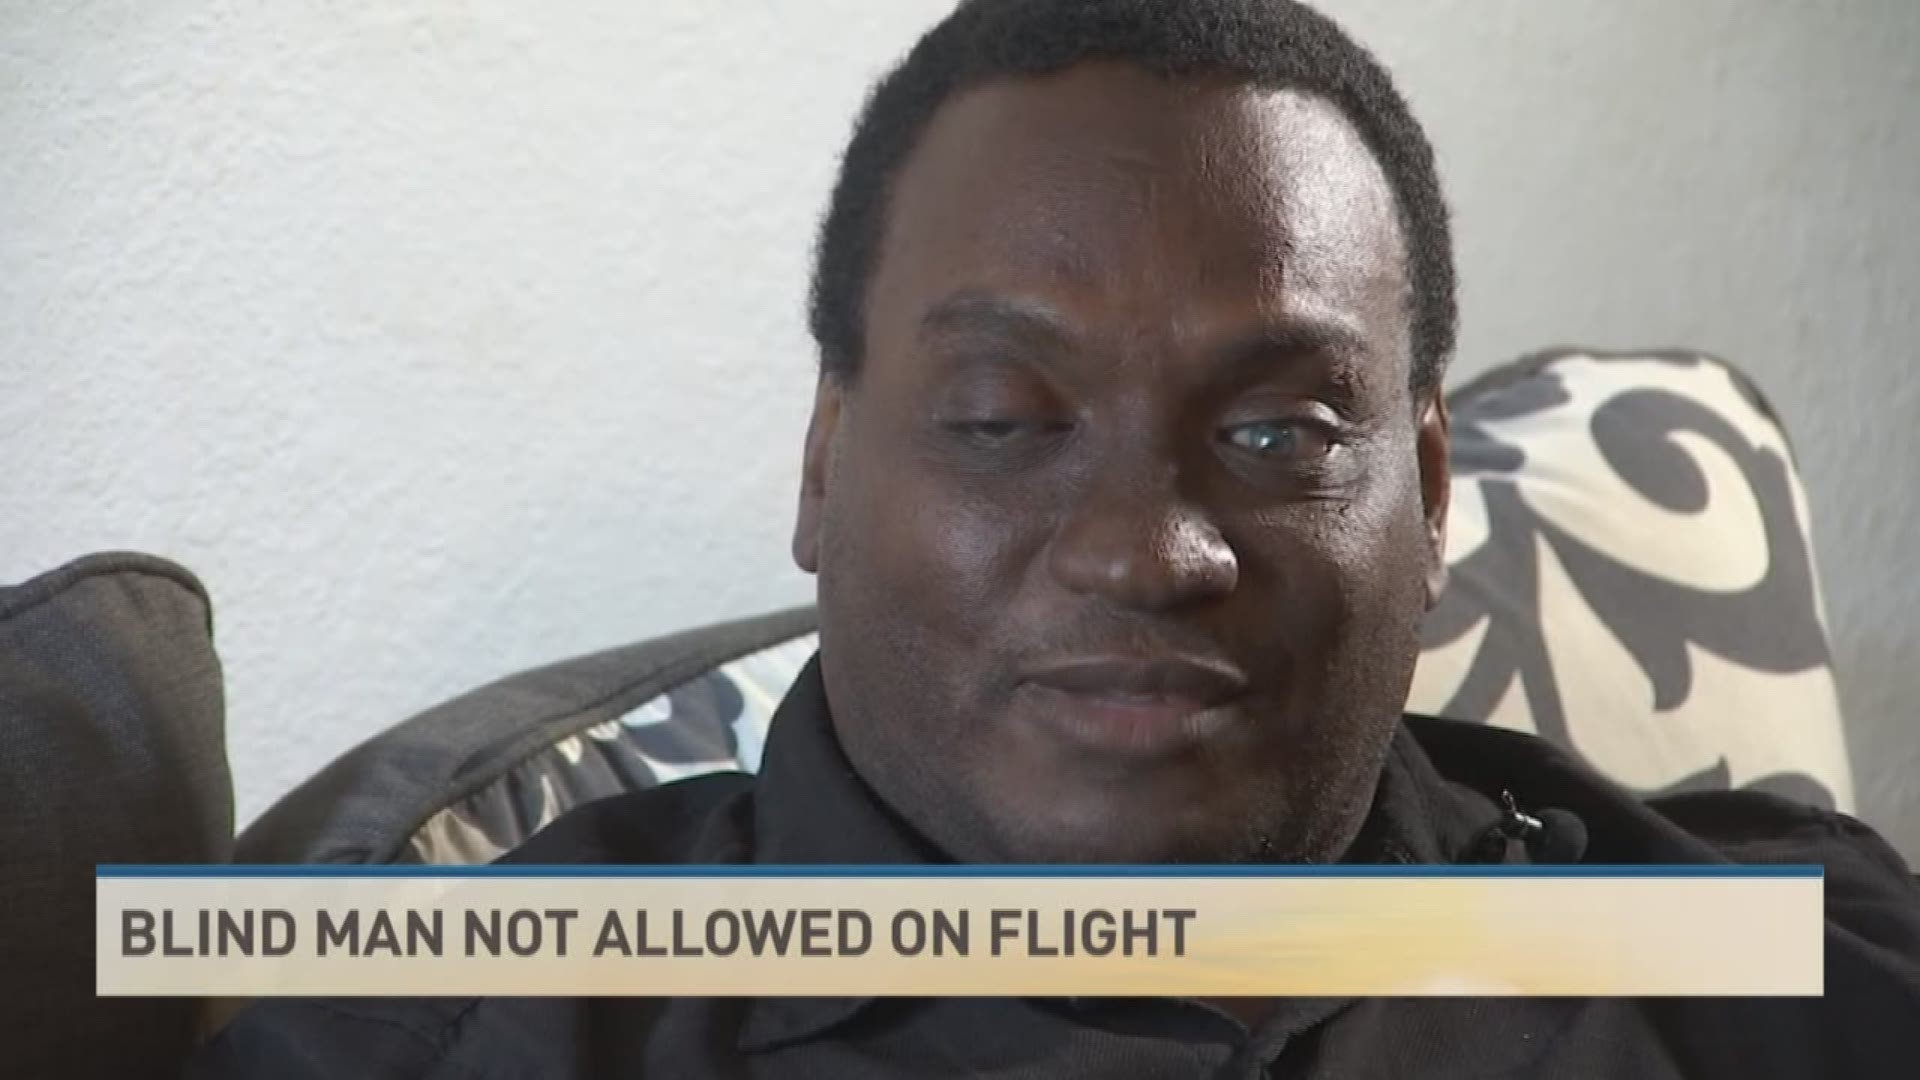 A Tampa man says he is still in shock after being turned away from a Frontier Airlines flight because he is blind.